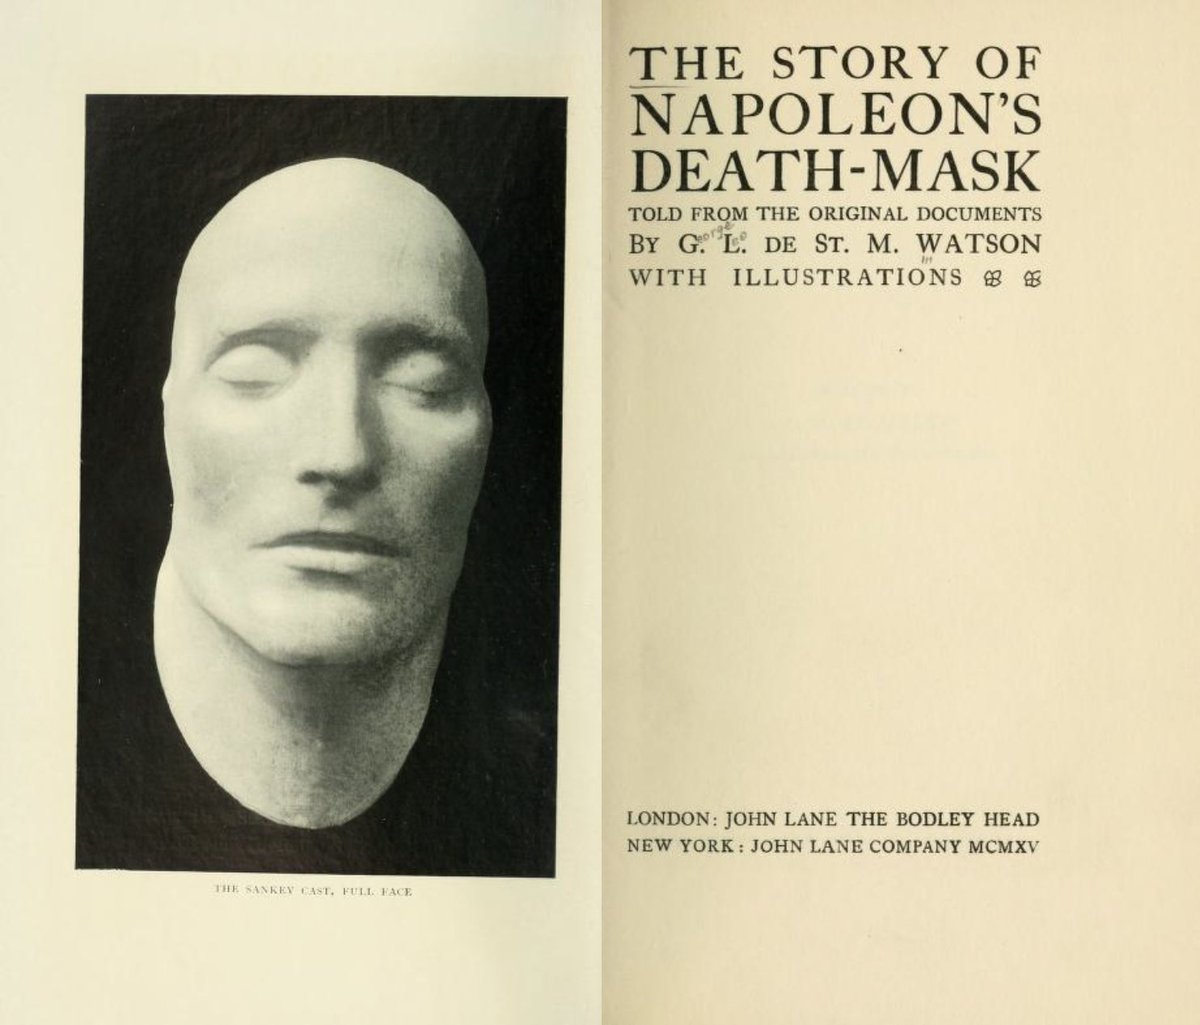 A 1915 investigation — engorged with bons mots and brimming with pith — into the destiny of the death mask of Napoleon, who died #onthisday in 1821. publicdomainreview.org/collection/nap… #otd